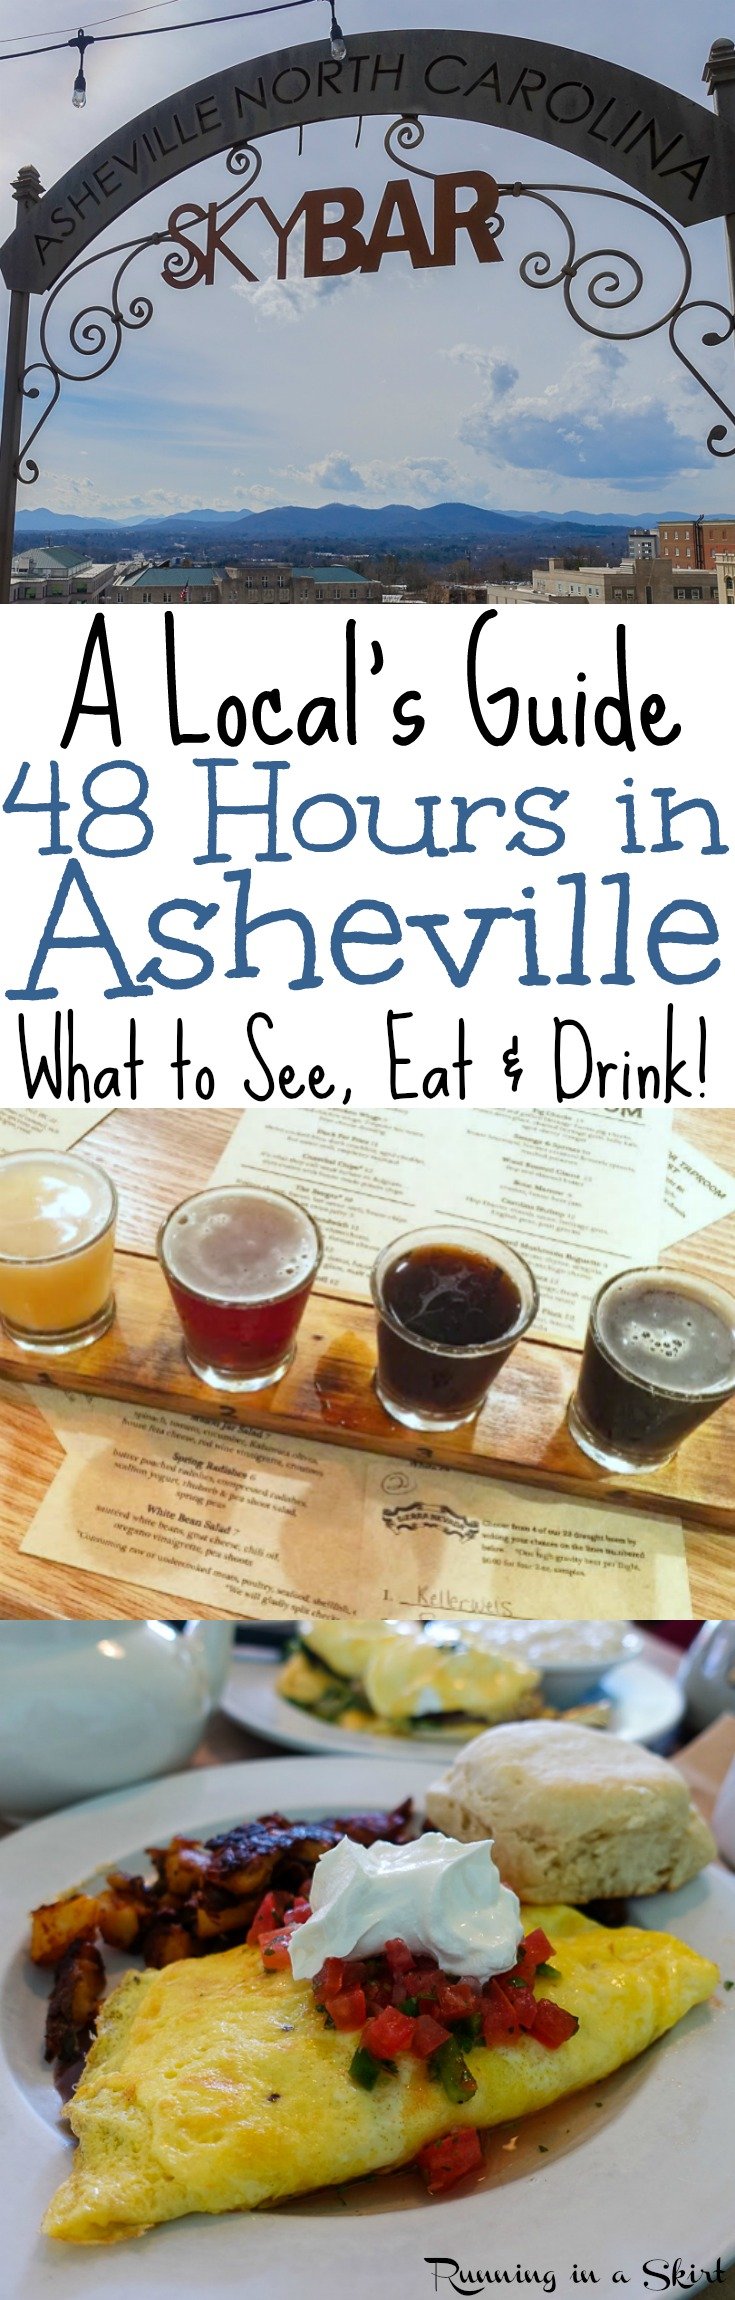 Things to Do In 48 Hours in Asheville, North Carolina - a Local's Travel Guide and complete itinerary including fun downtown restaurants, free hiking, breweries, shopping, coffee and nightlife. Includes what to do to get great eats, visit the Blue Ridge Parkway, Biscuit Head and Tupelo Honey Cafe! / Running in a Skirt via @juliewunder